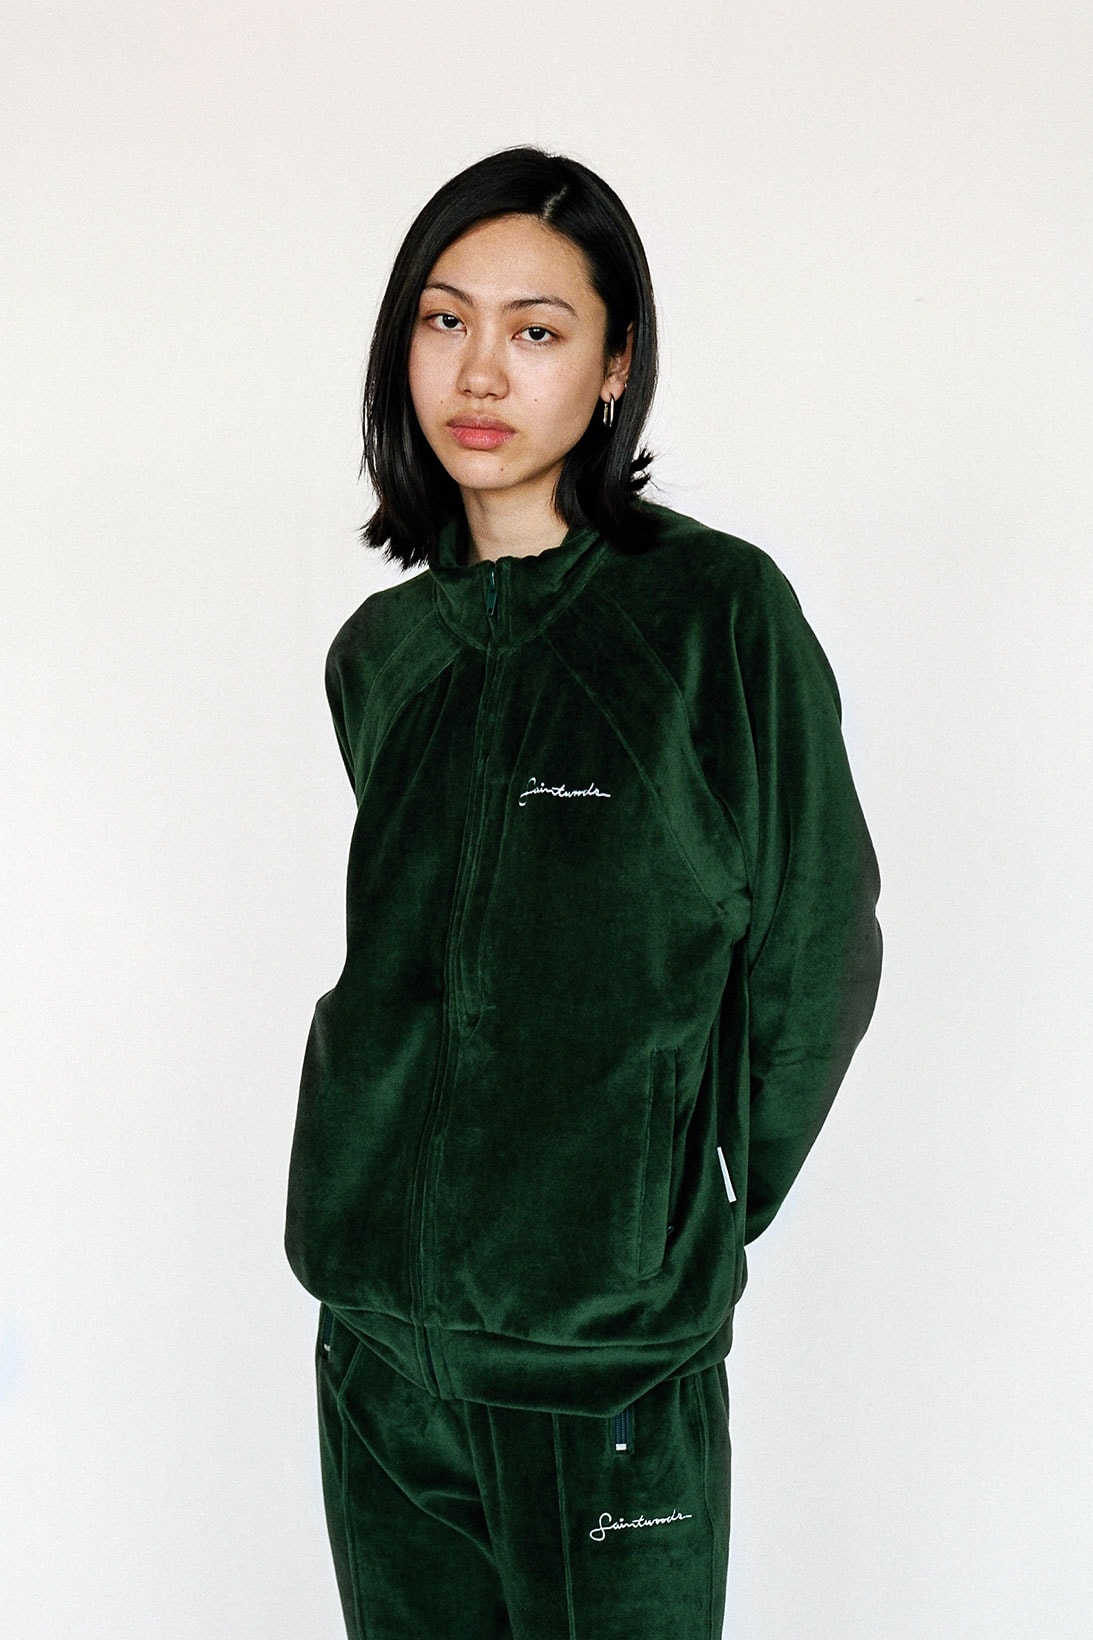 saintwoods sw 011 collection green velour tracksuit jackets pants